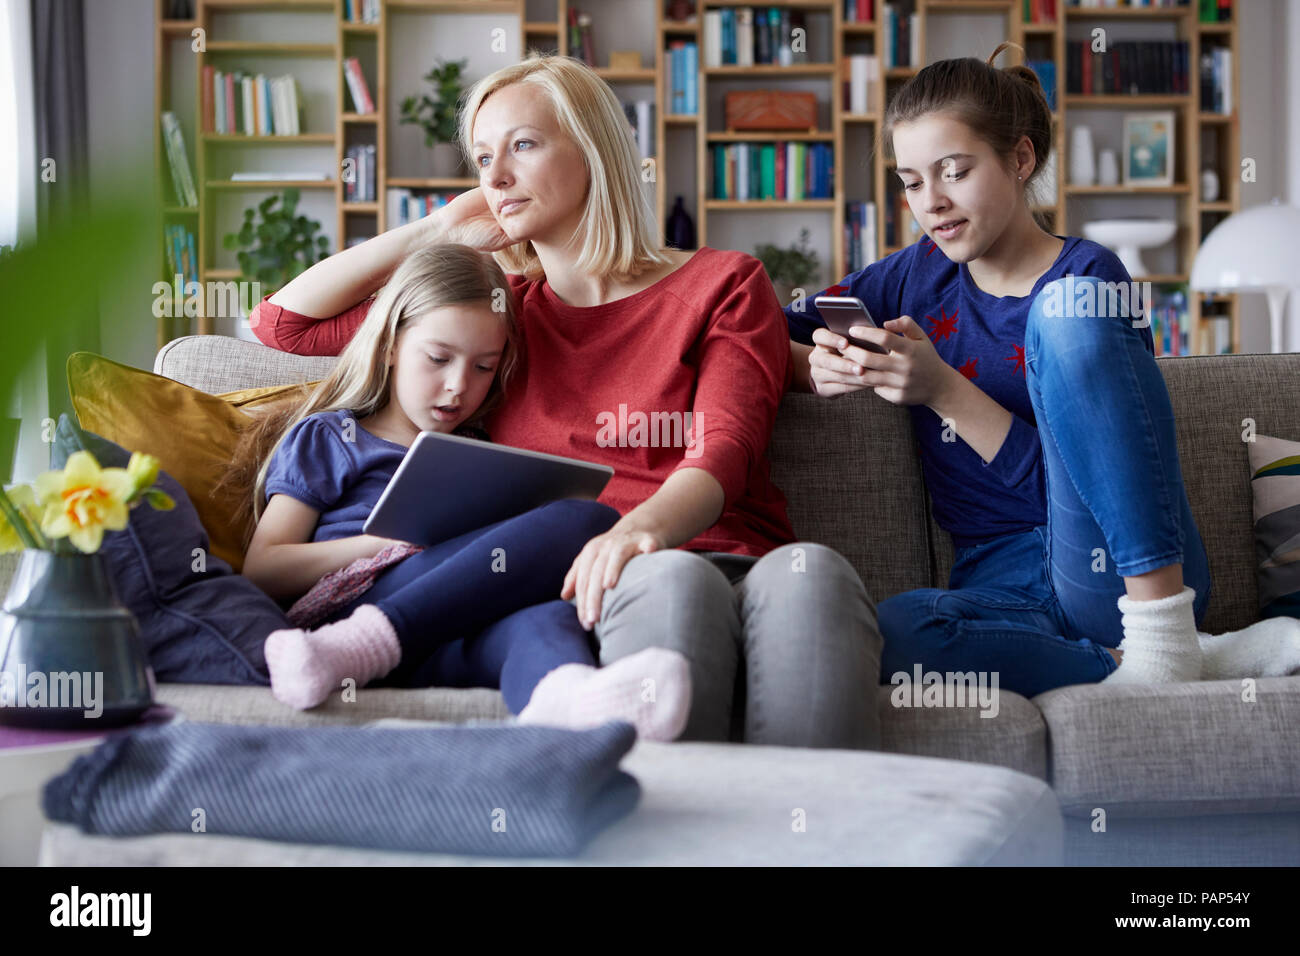 Sad mother sitting on couch with her daughters, playing with mobile devices Stock Photo